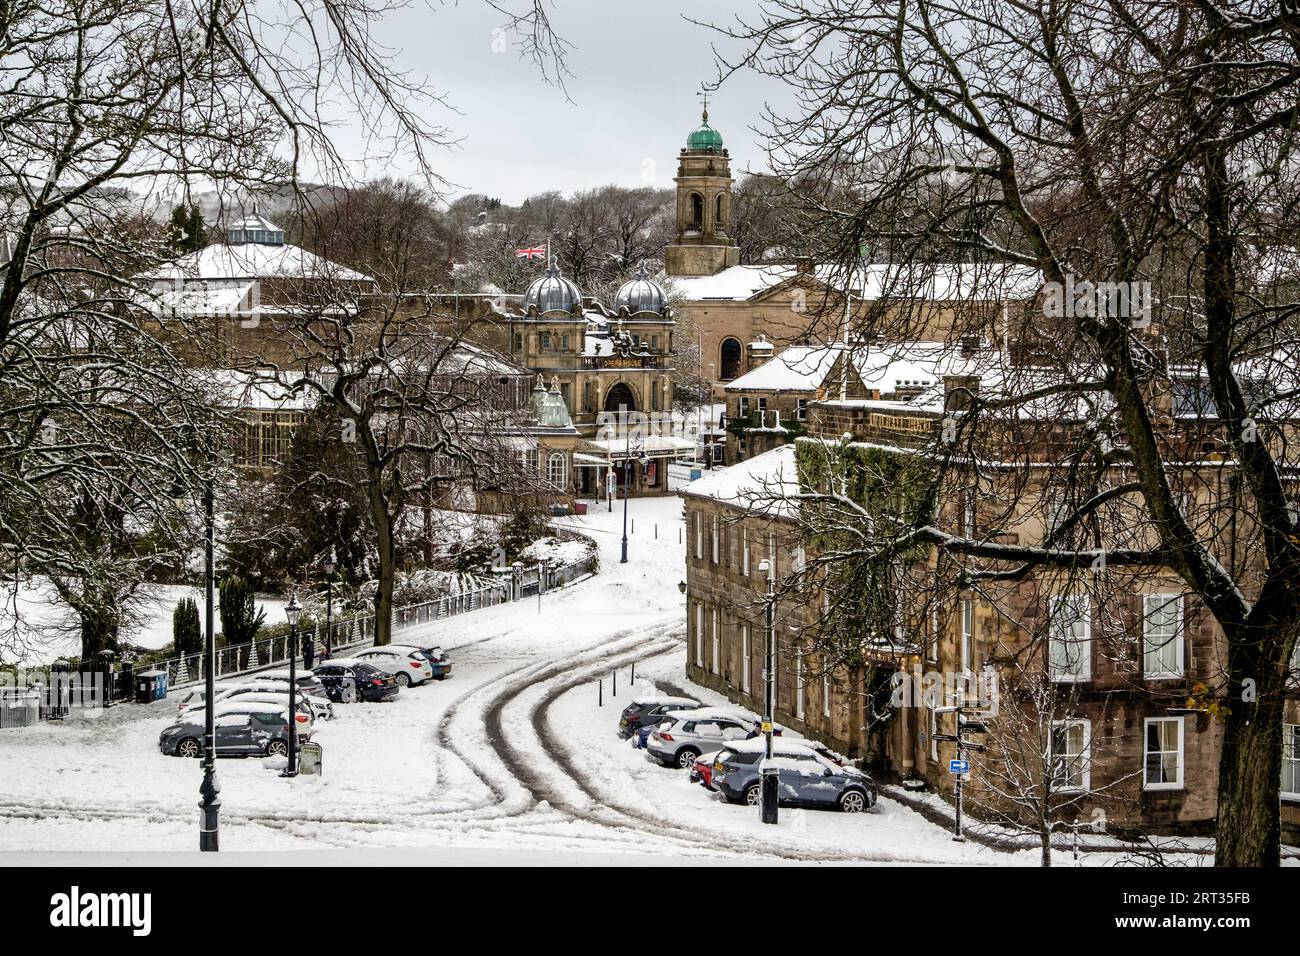 The Old Hall Hotel and the Opera House  in The centre of Buxton in Derbyshire under a covering of winter snow Stock Photo